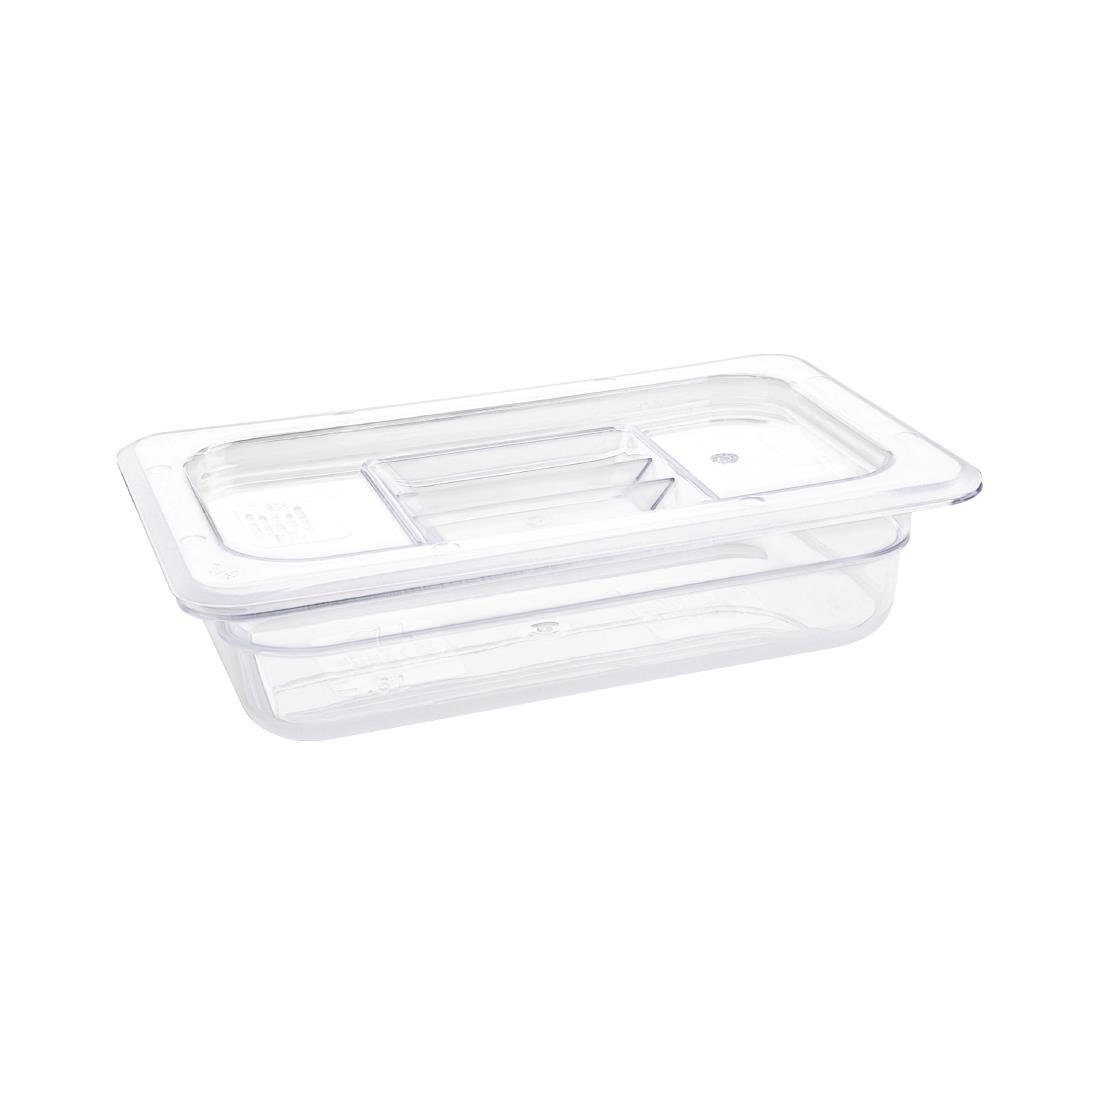 Vogue Polycarbonate 1/4 Gastronorm Container 65mm Clear - U236  - 2